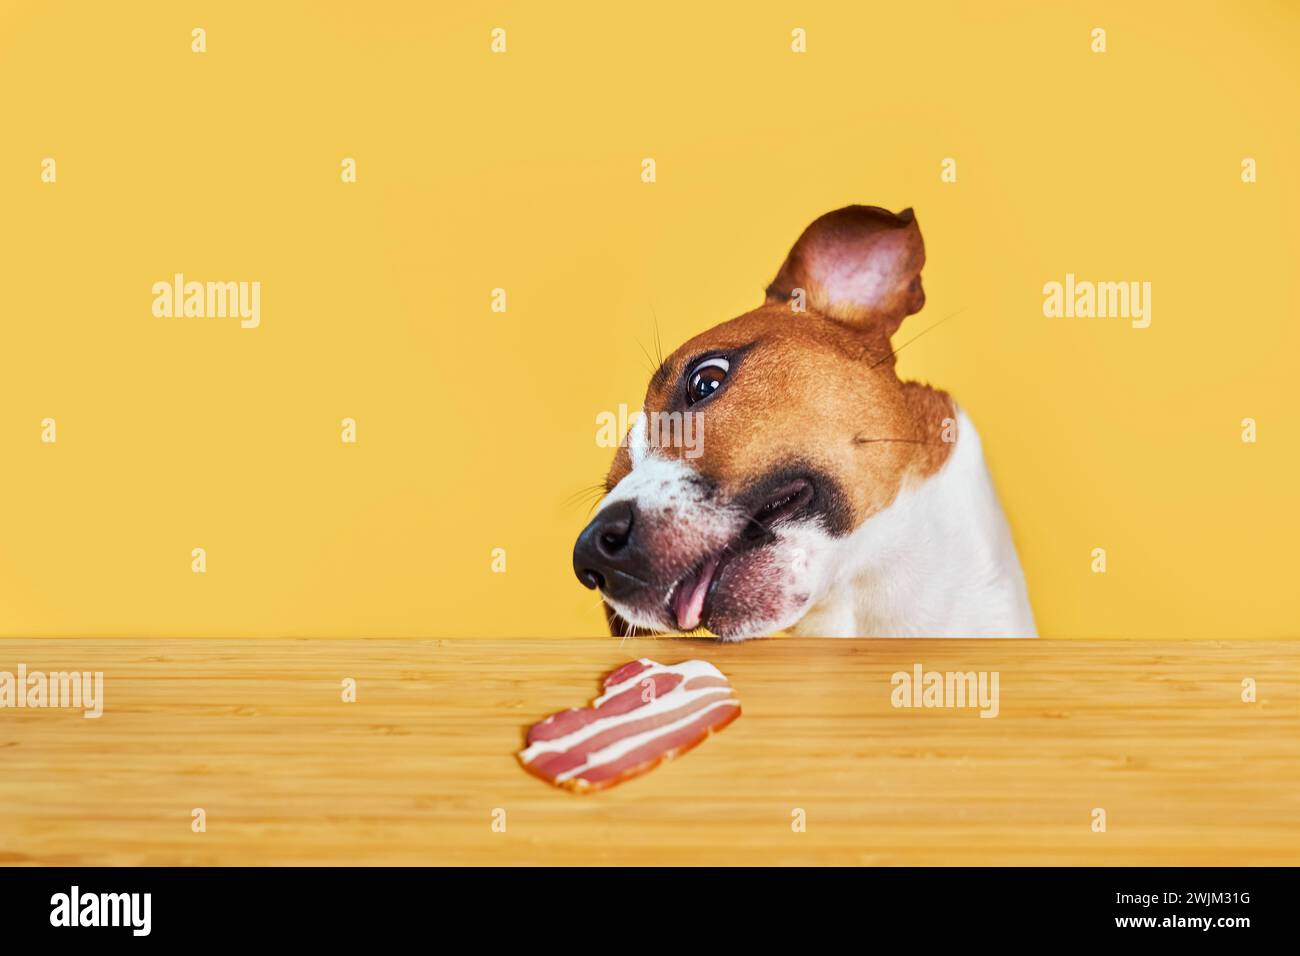 Jack Russell terrier dog eat delicious piece of bacon from a table. Funny Hungry dog portrait with tongue on Yellow background looking at the meat on Stock Photo